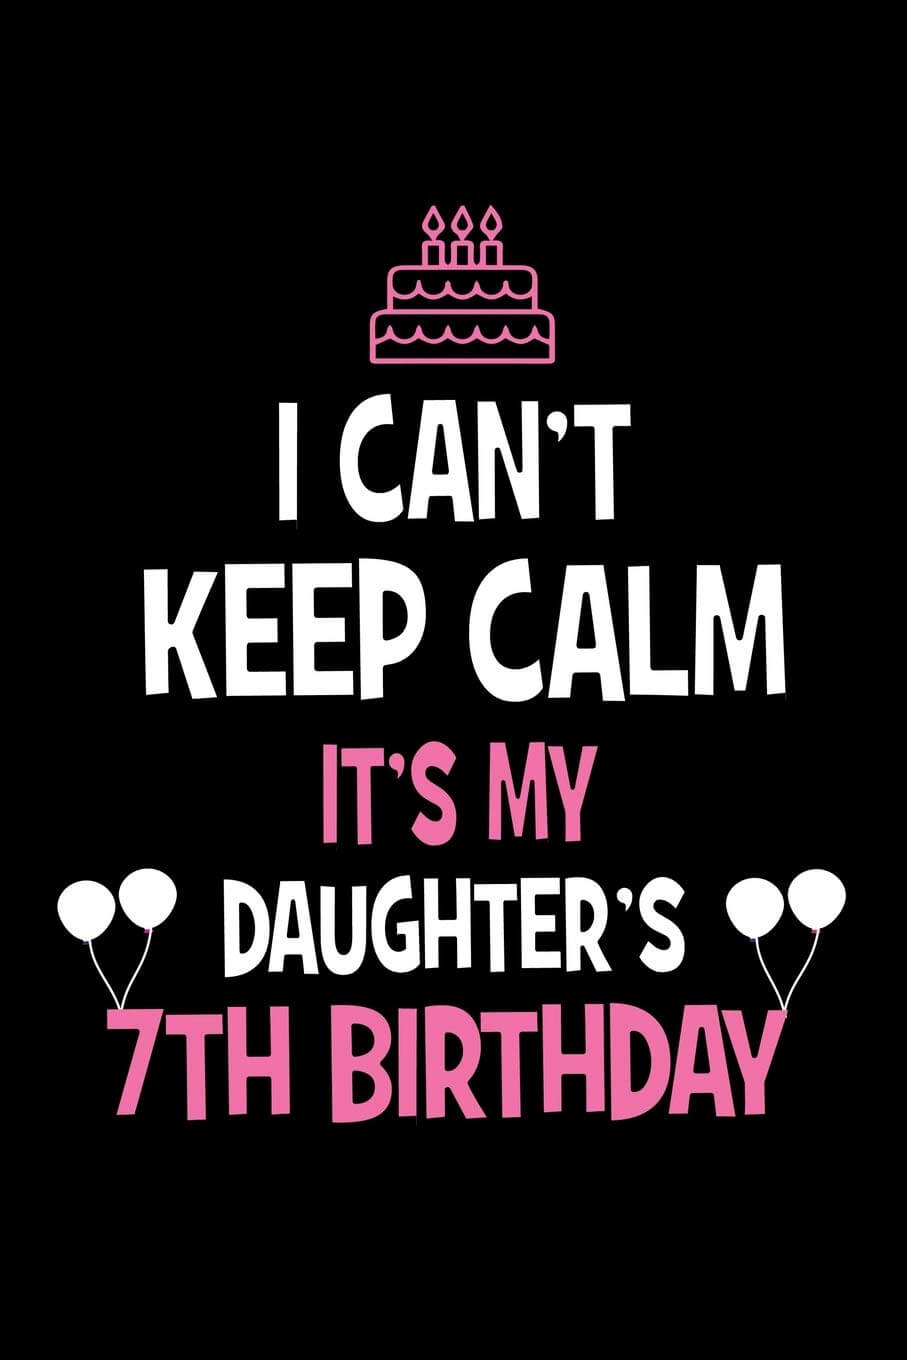 266-happy-7th-birthday-daughter-wishes-90lovehome